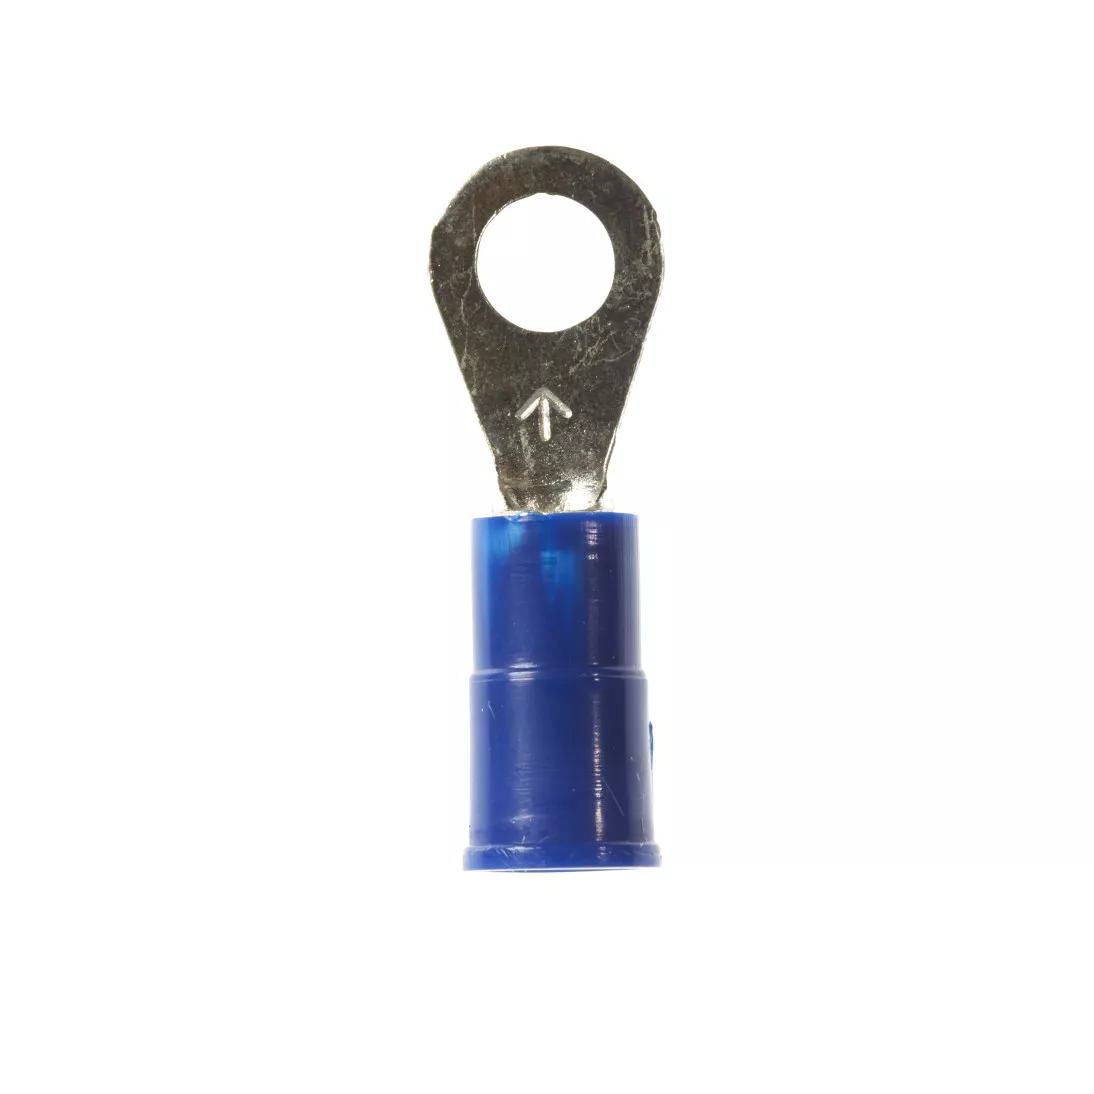 3M™ Scotchlok™ Ring Vinyl Insulated, 100/bottle, MV14-8R/LX,
standard-style ring tongue fits around the stud, 500/Case